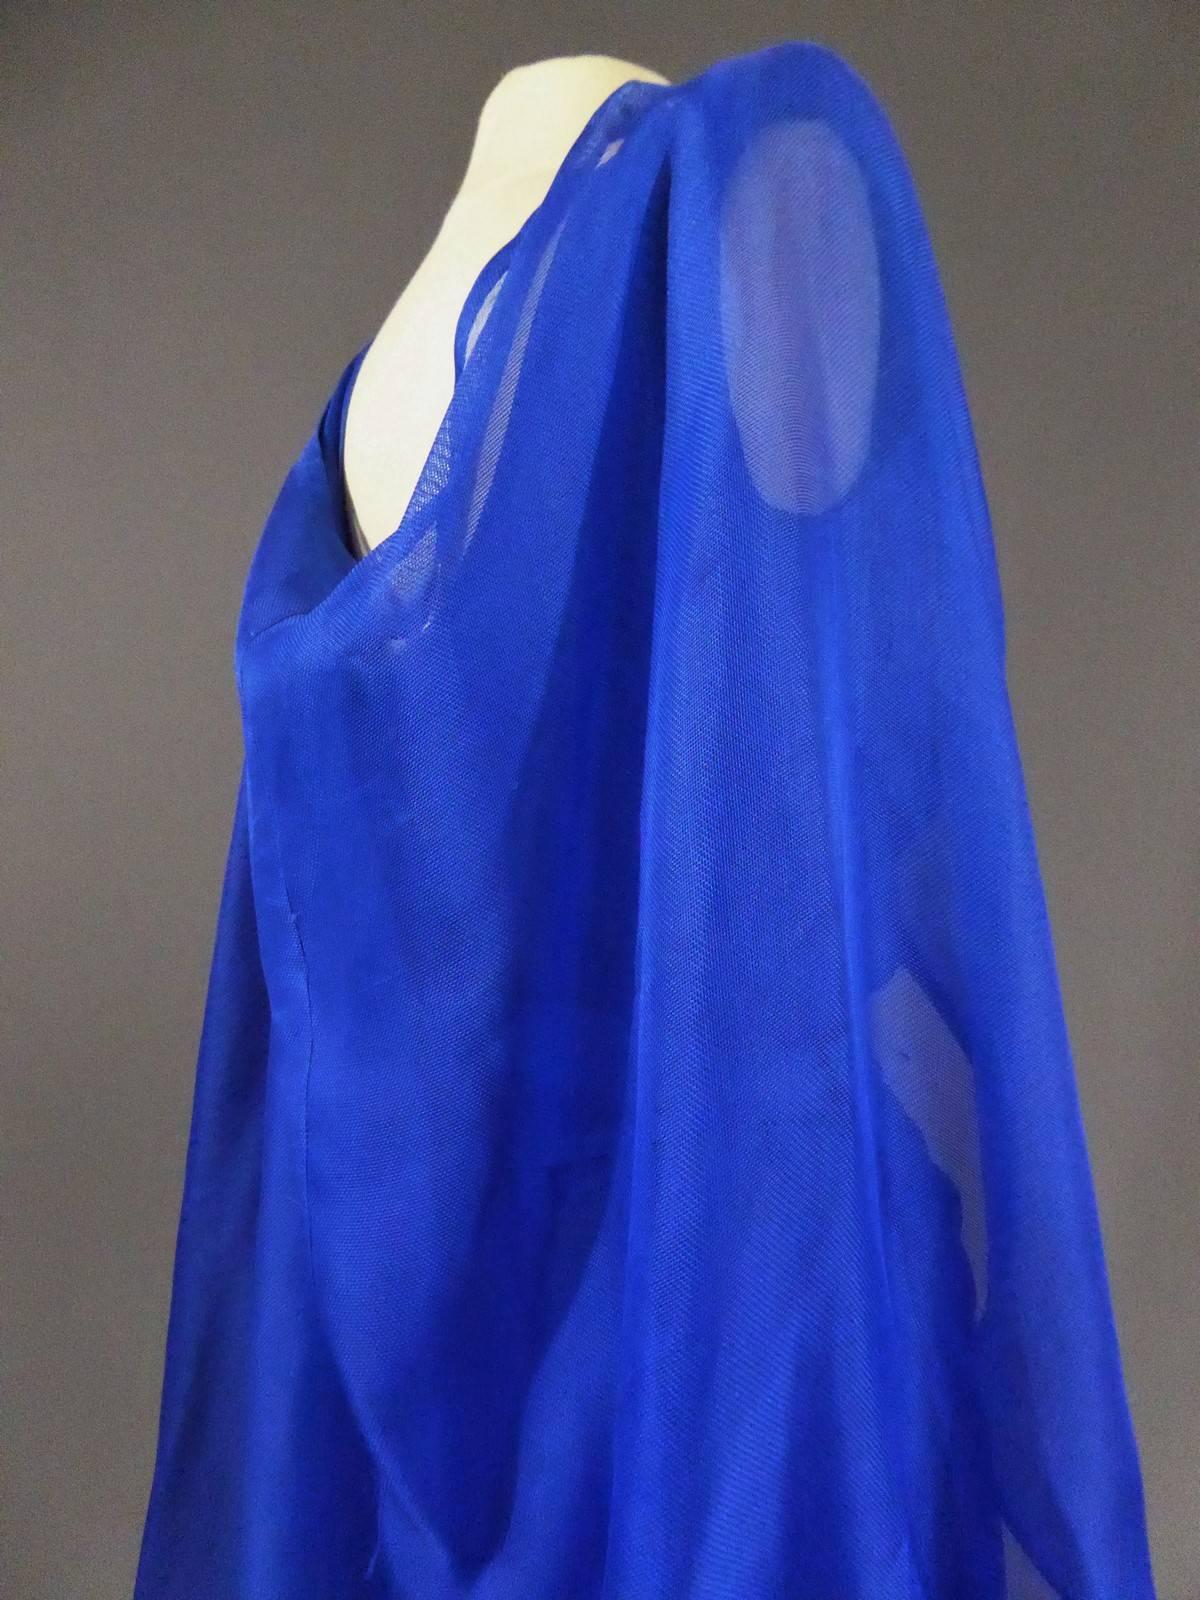 Hubert de Givenchy Numbered 97 2